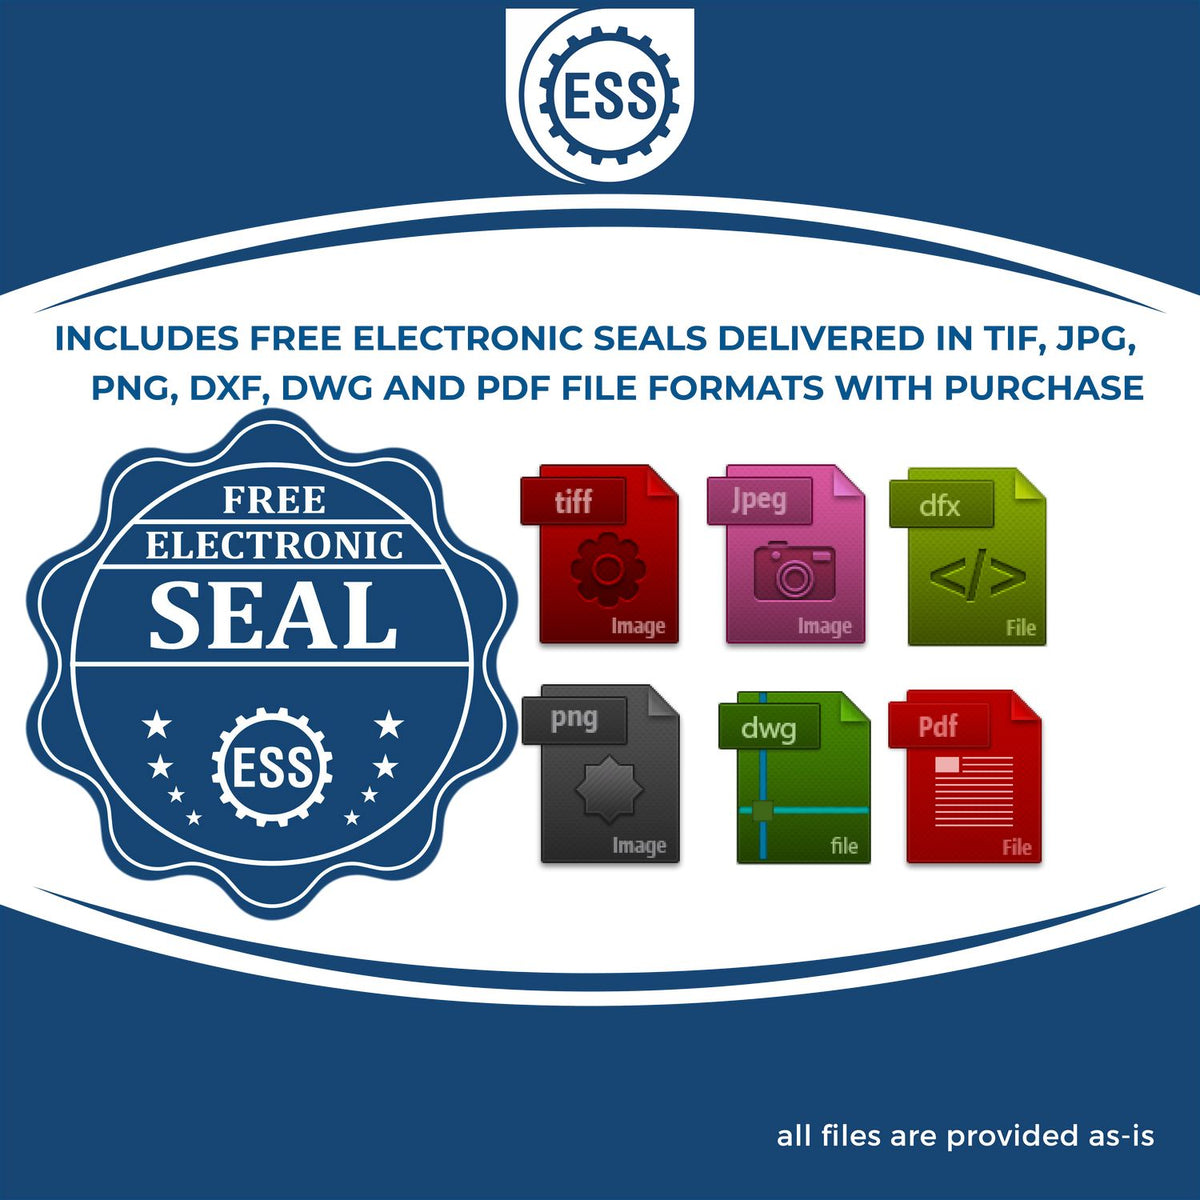 An infographic for the free electronic seal for the Hybrid Louisiana Land Surveyor Seal illustrating the different file type icons such as DXF, DWG, TIF, JPG and PNG.